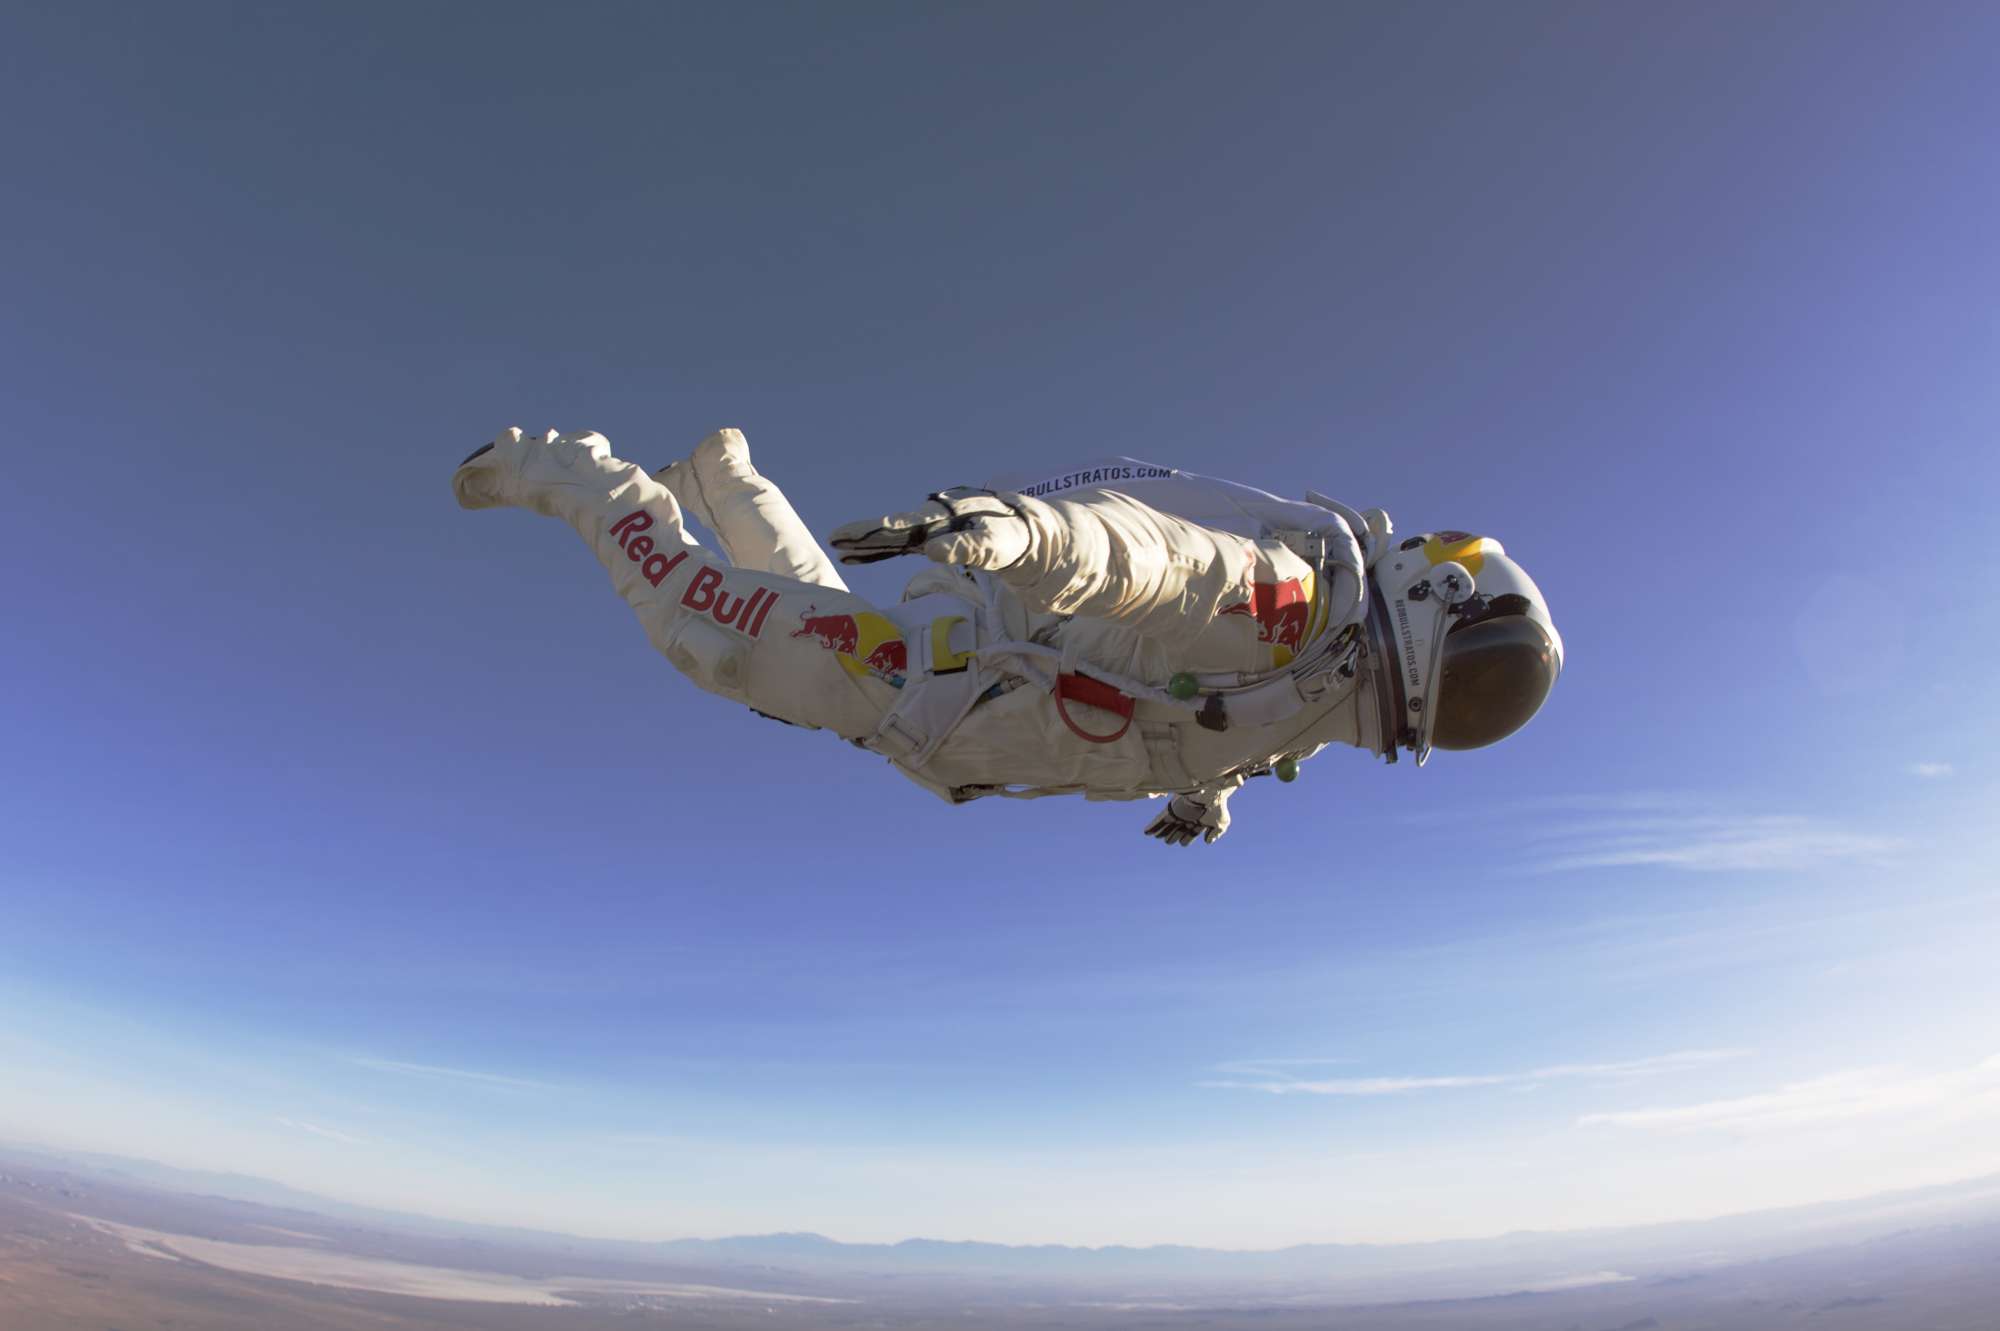 Skydiver Aims to Jump From 120,000 Feet, Break the Sound Barrier | WIRED